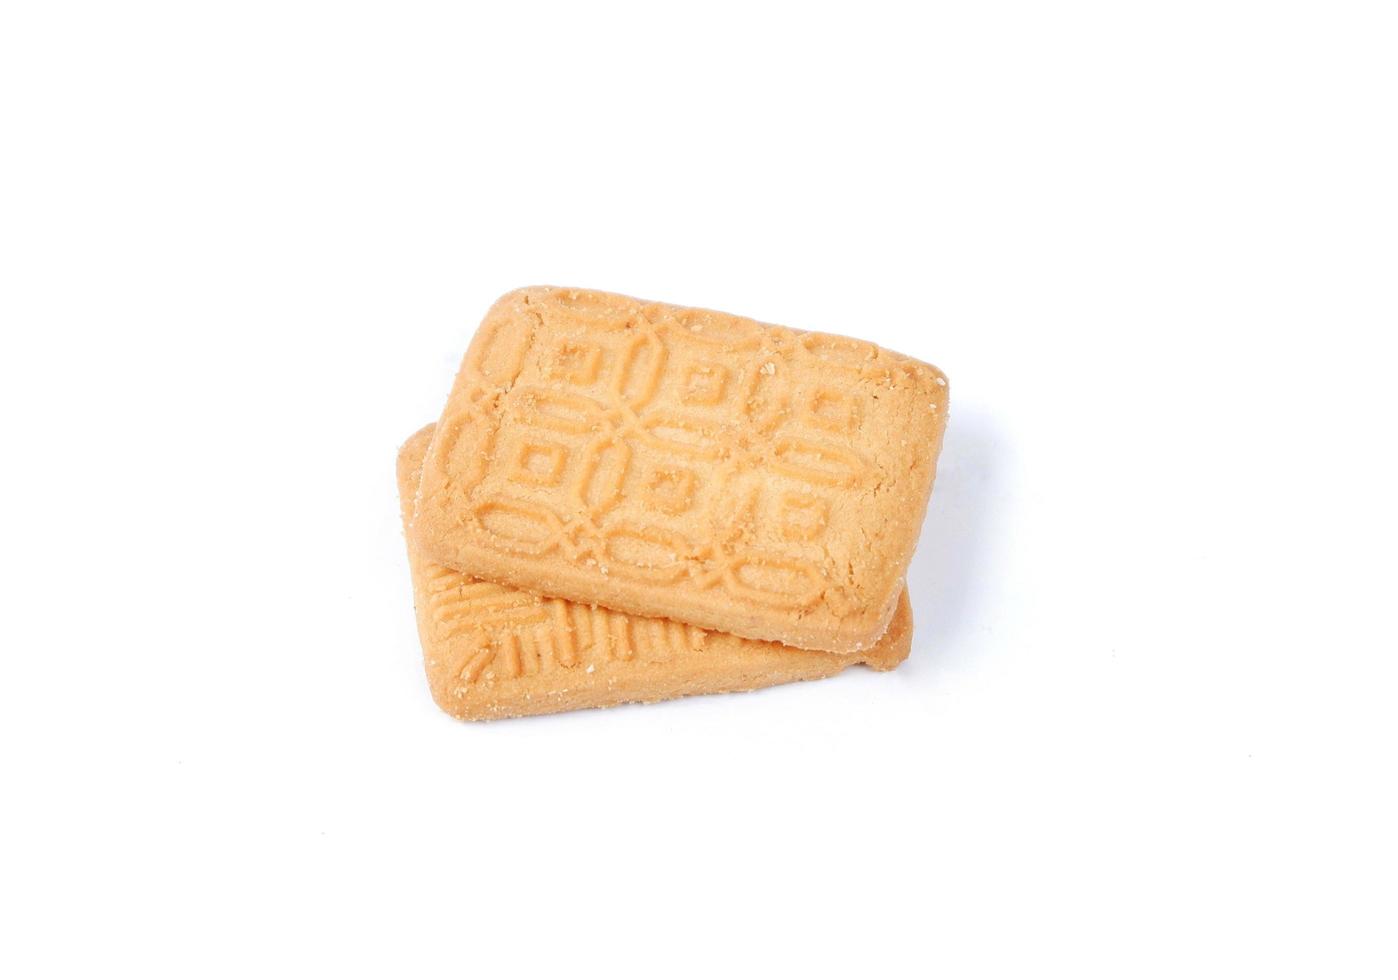 Biscuit isolated on a white background photo